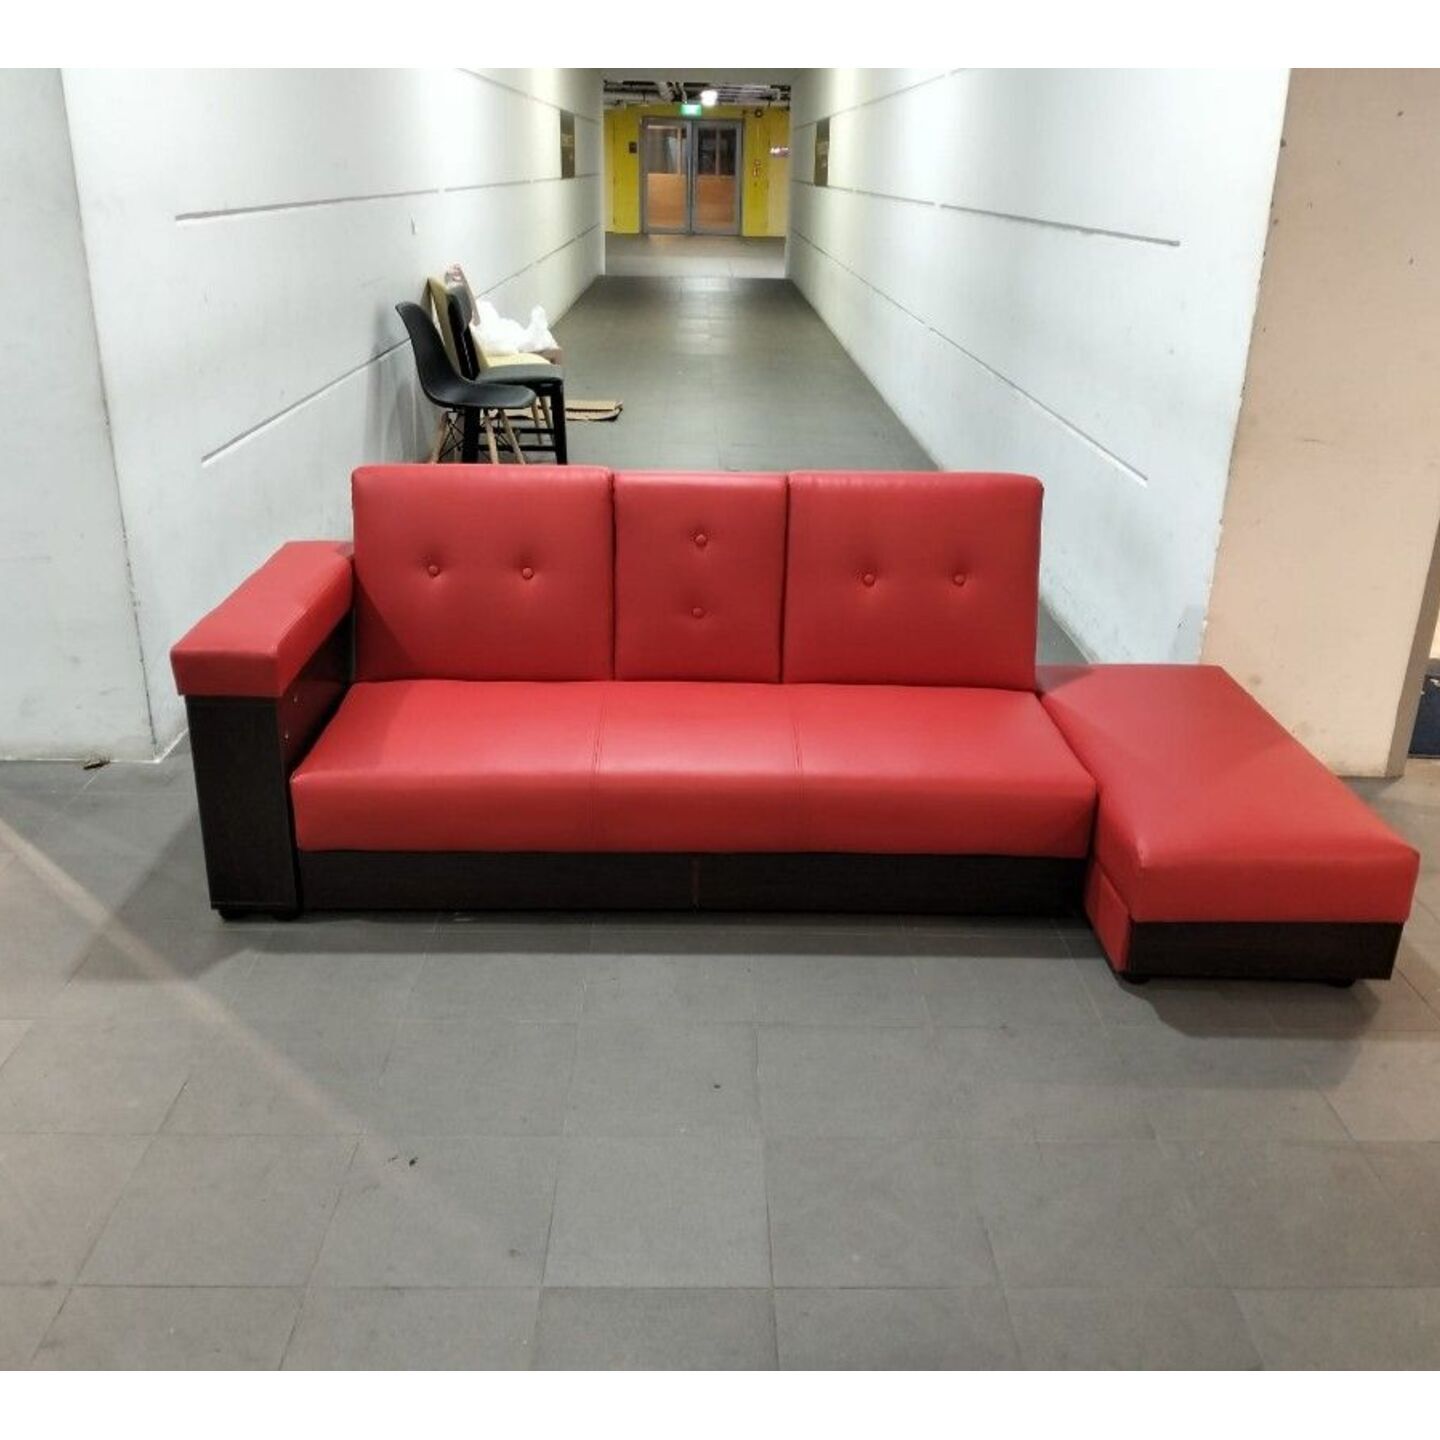 MIKO Storage Sofa Bed in RED PVC